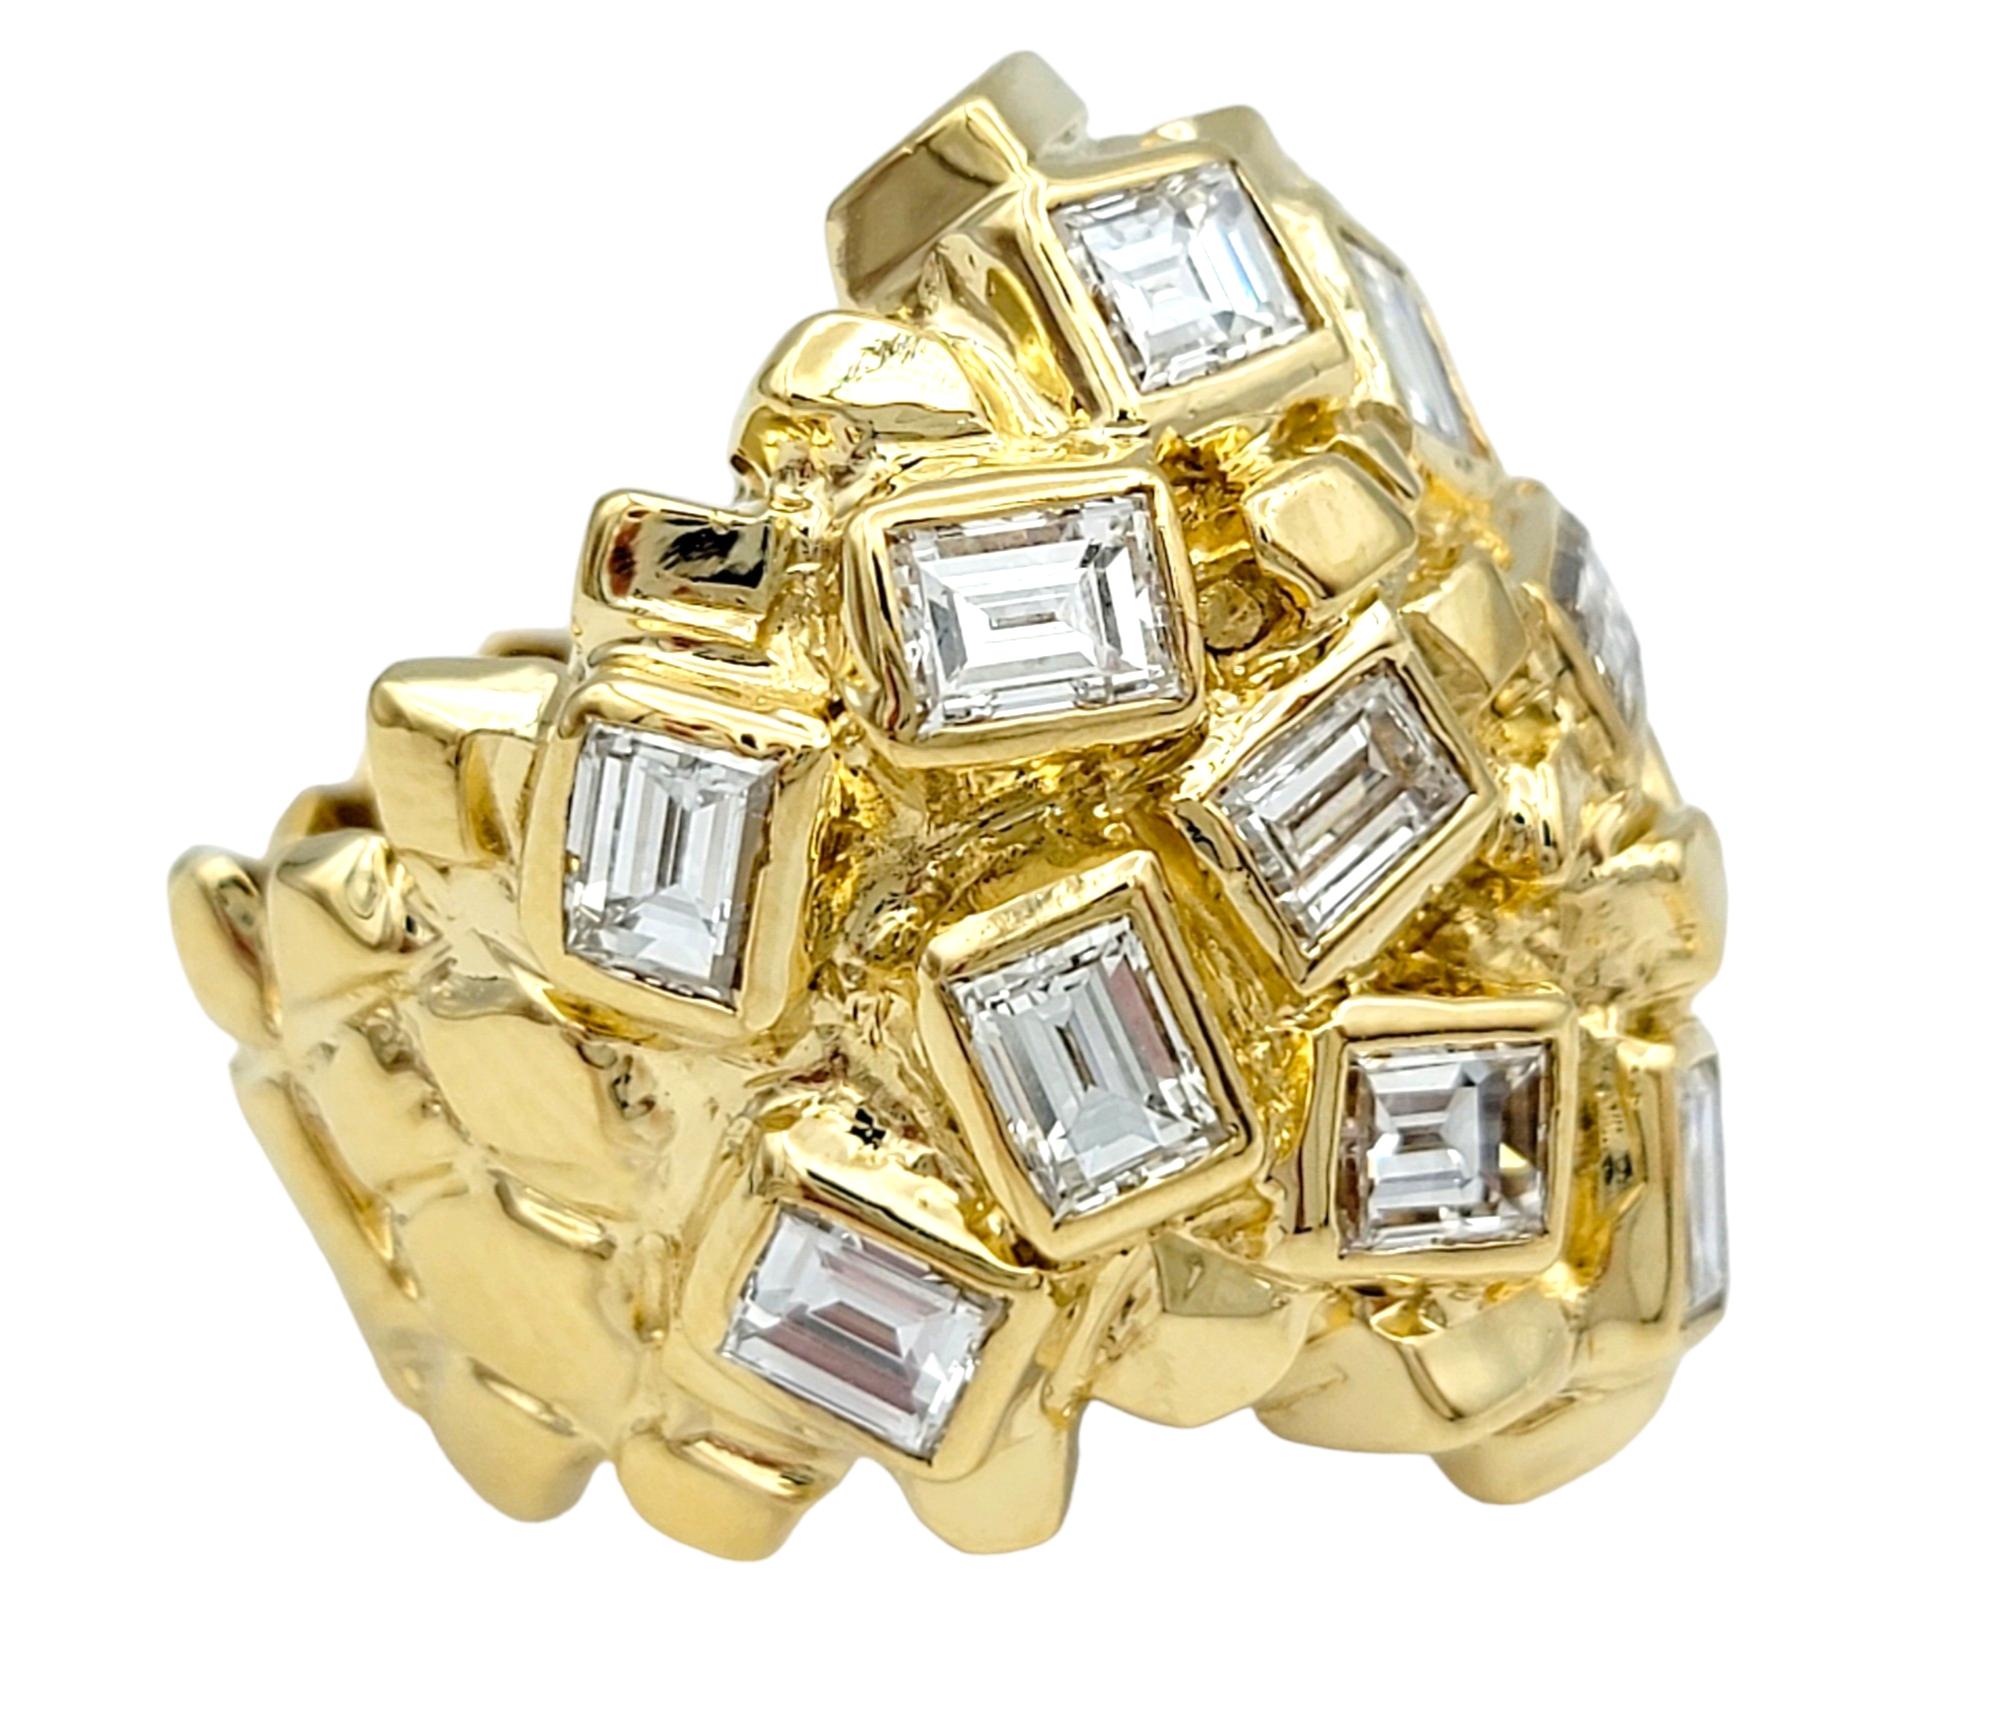 Ring Size: 6.25

This beautiful cocktail ring boasts a unique design, exuding elegance and sophistication. Crafted in 14 karat yellow gold, it features emerald cut diamonds scattered throughout, creating a dazzling display of brilliance and